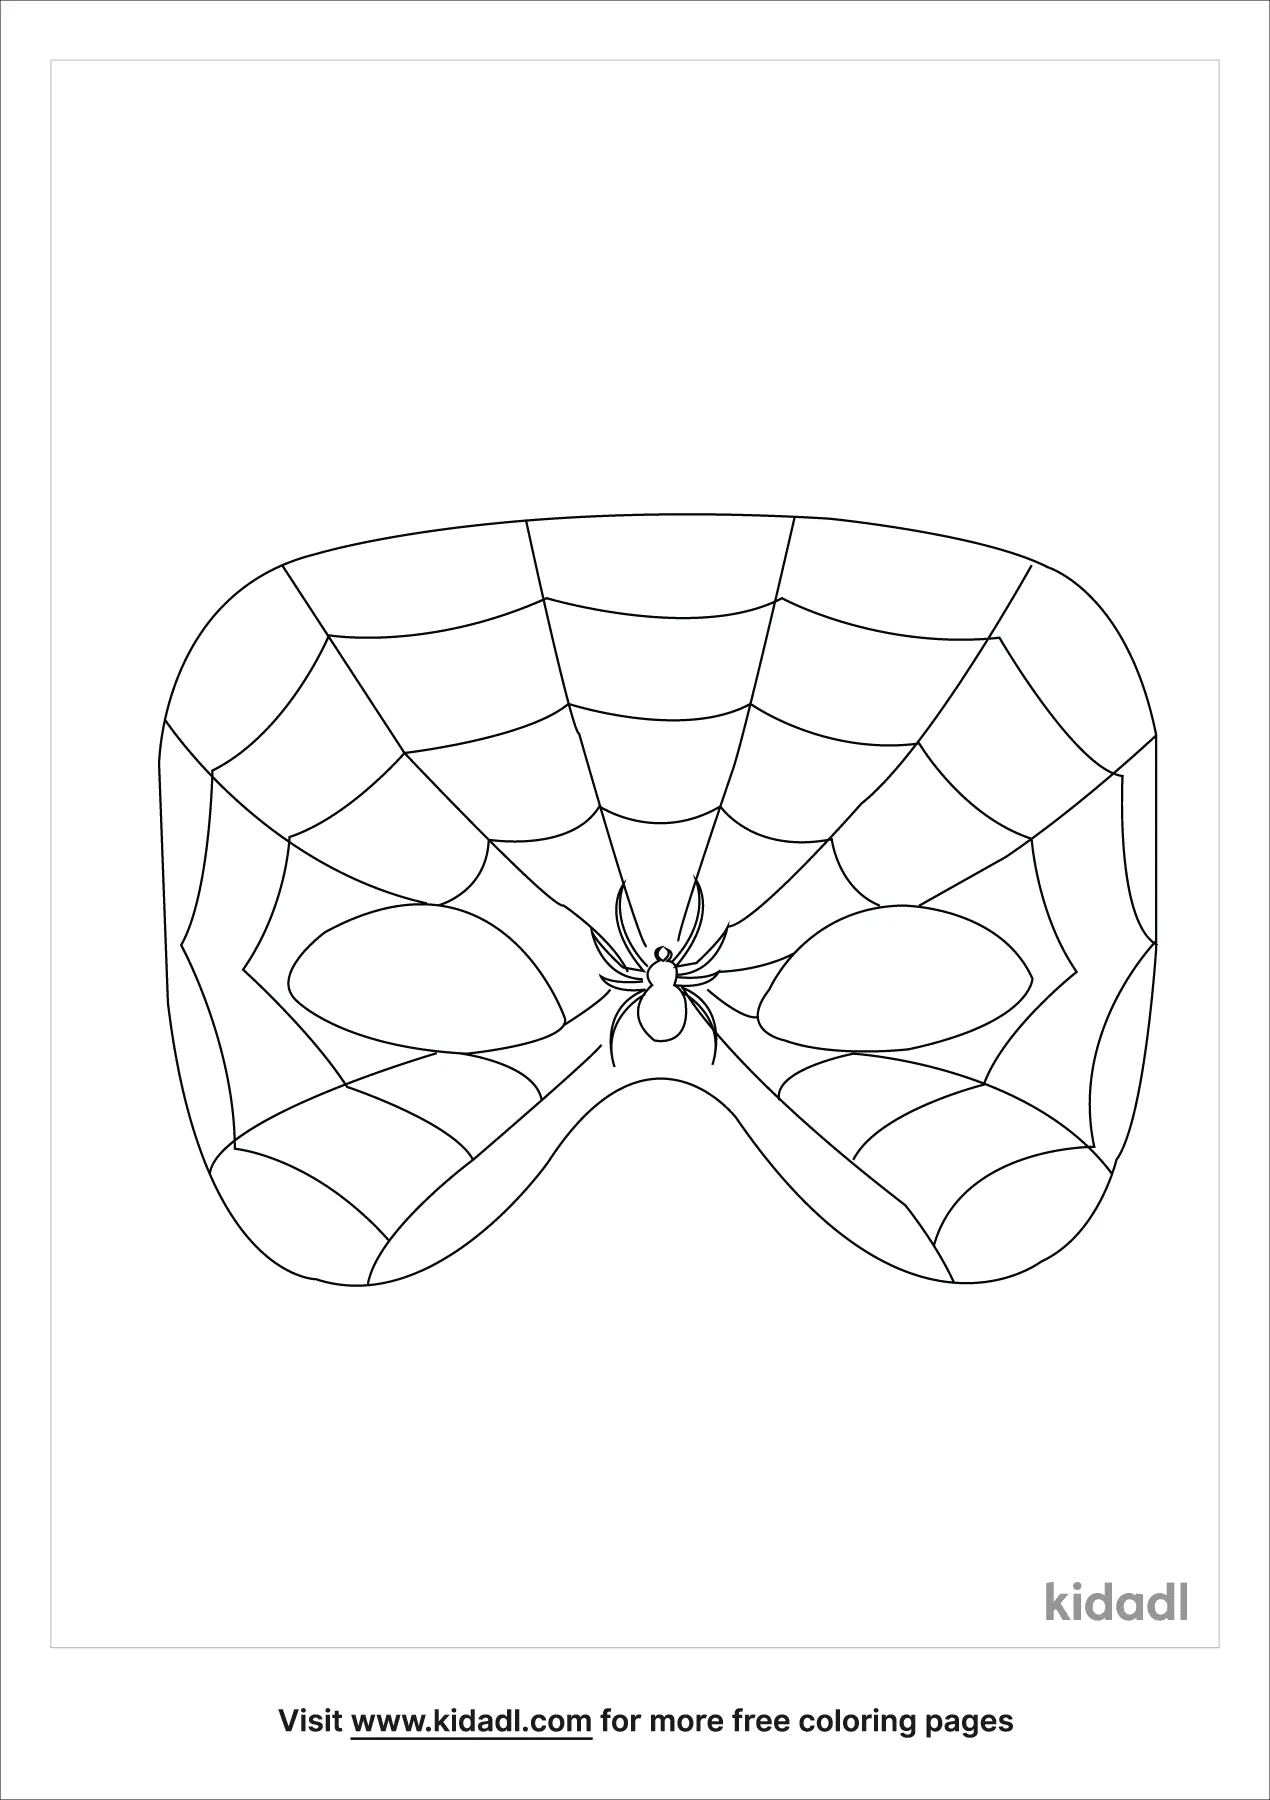 Free Spider Web Mask Coloring Page | Coloring Page Printables | Kidadl